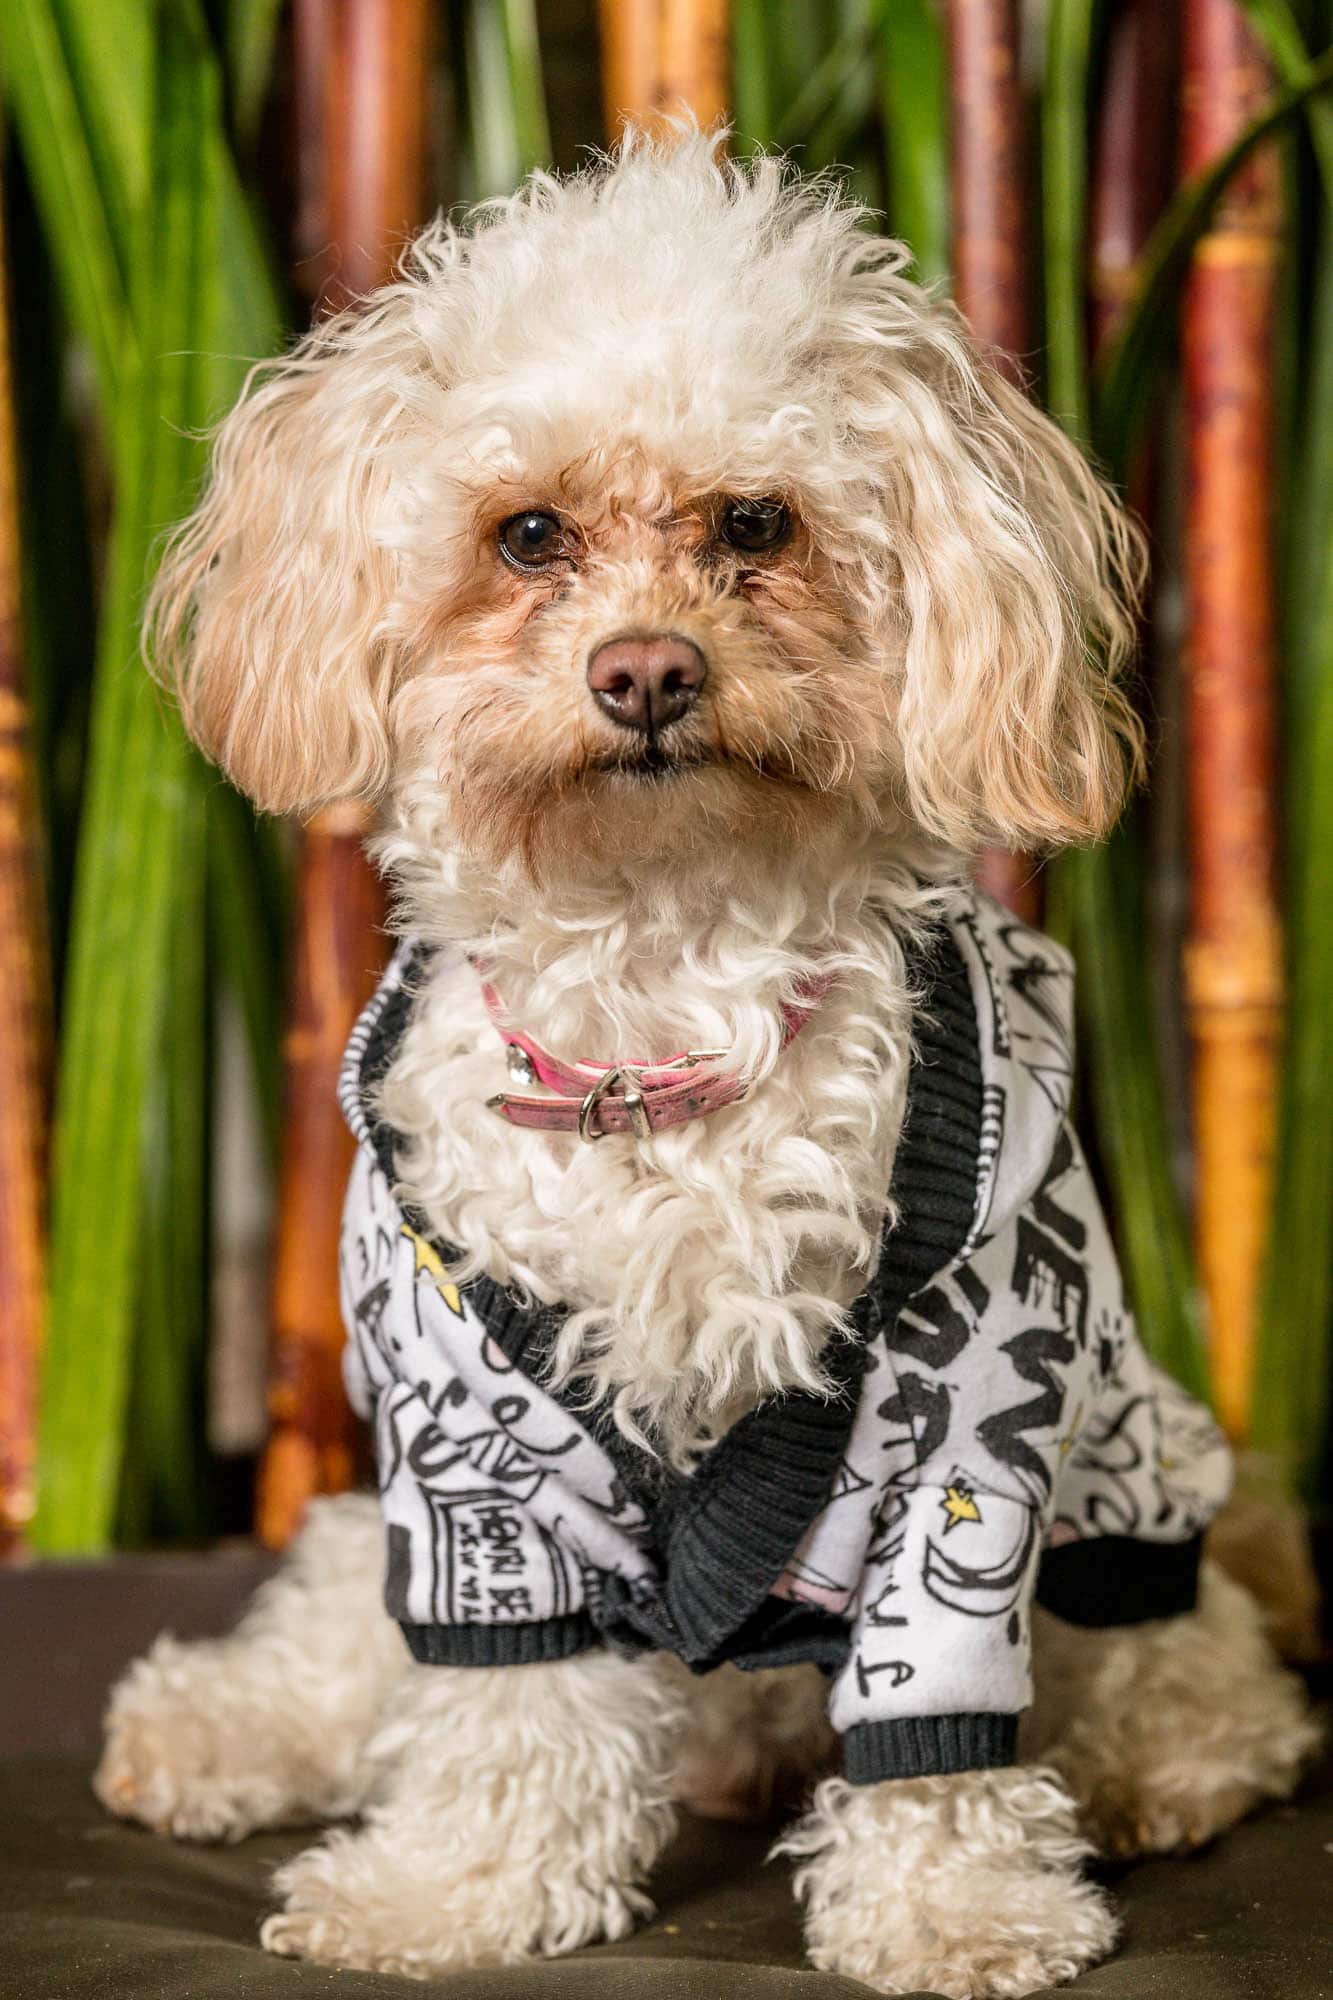 A small white dog wearing a black and white shirt.